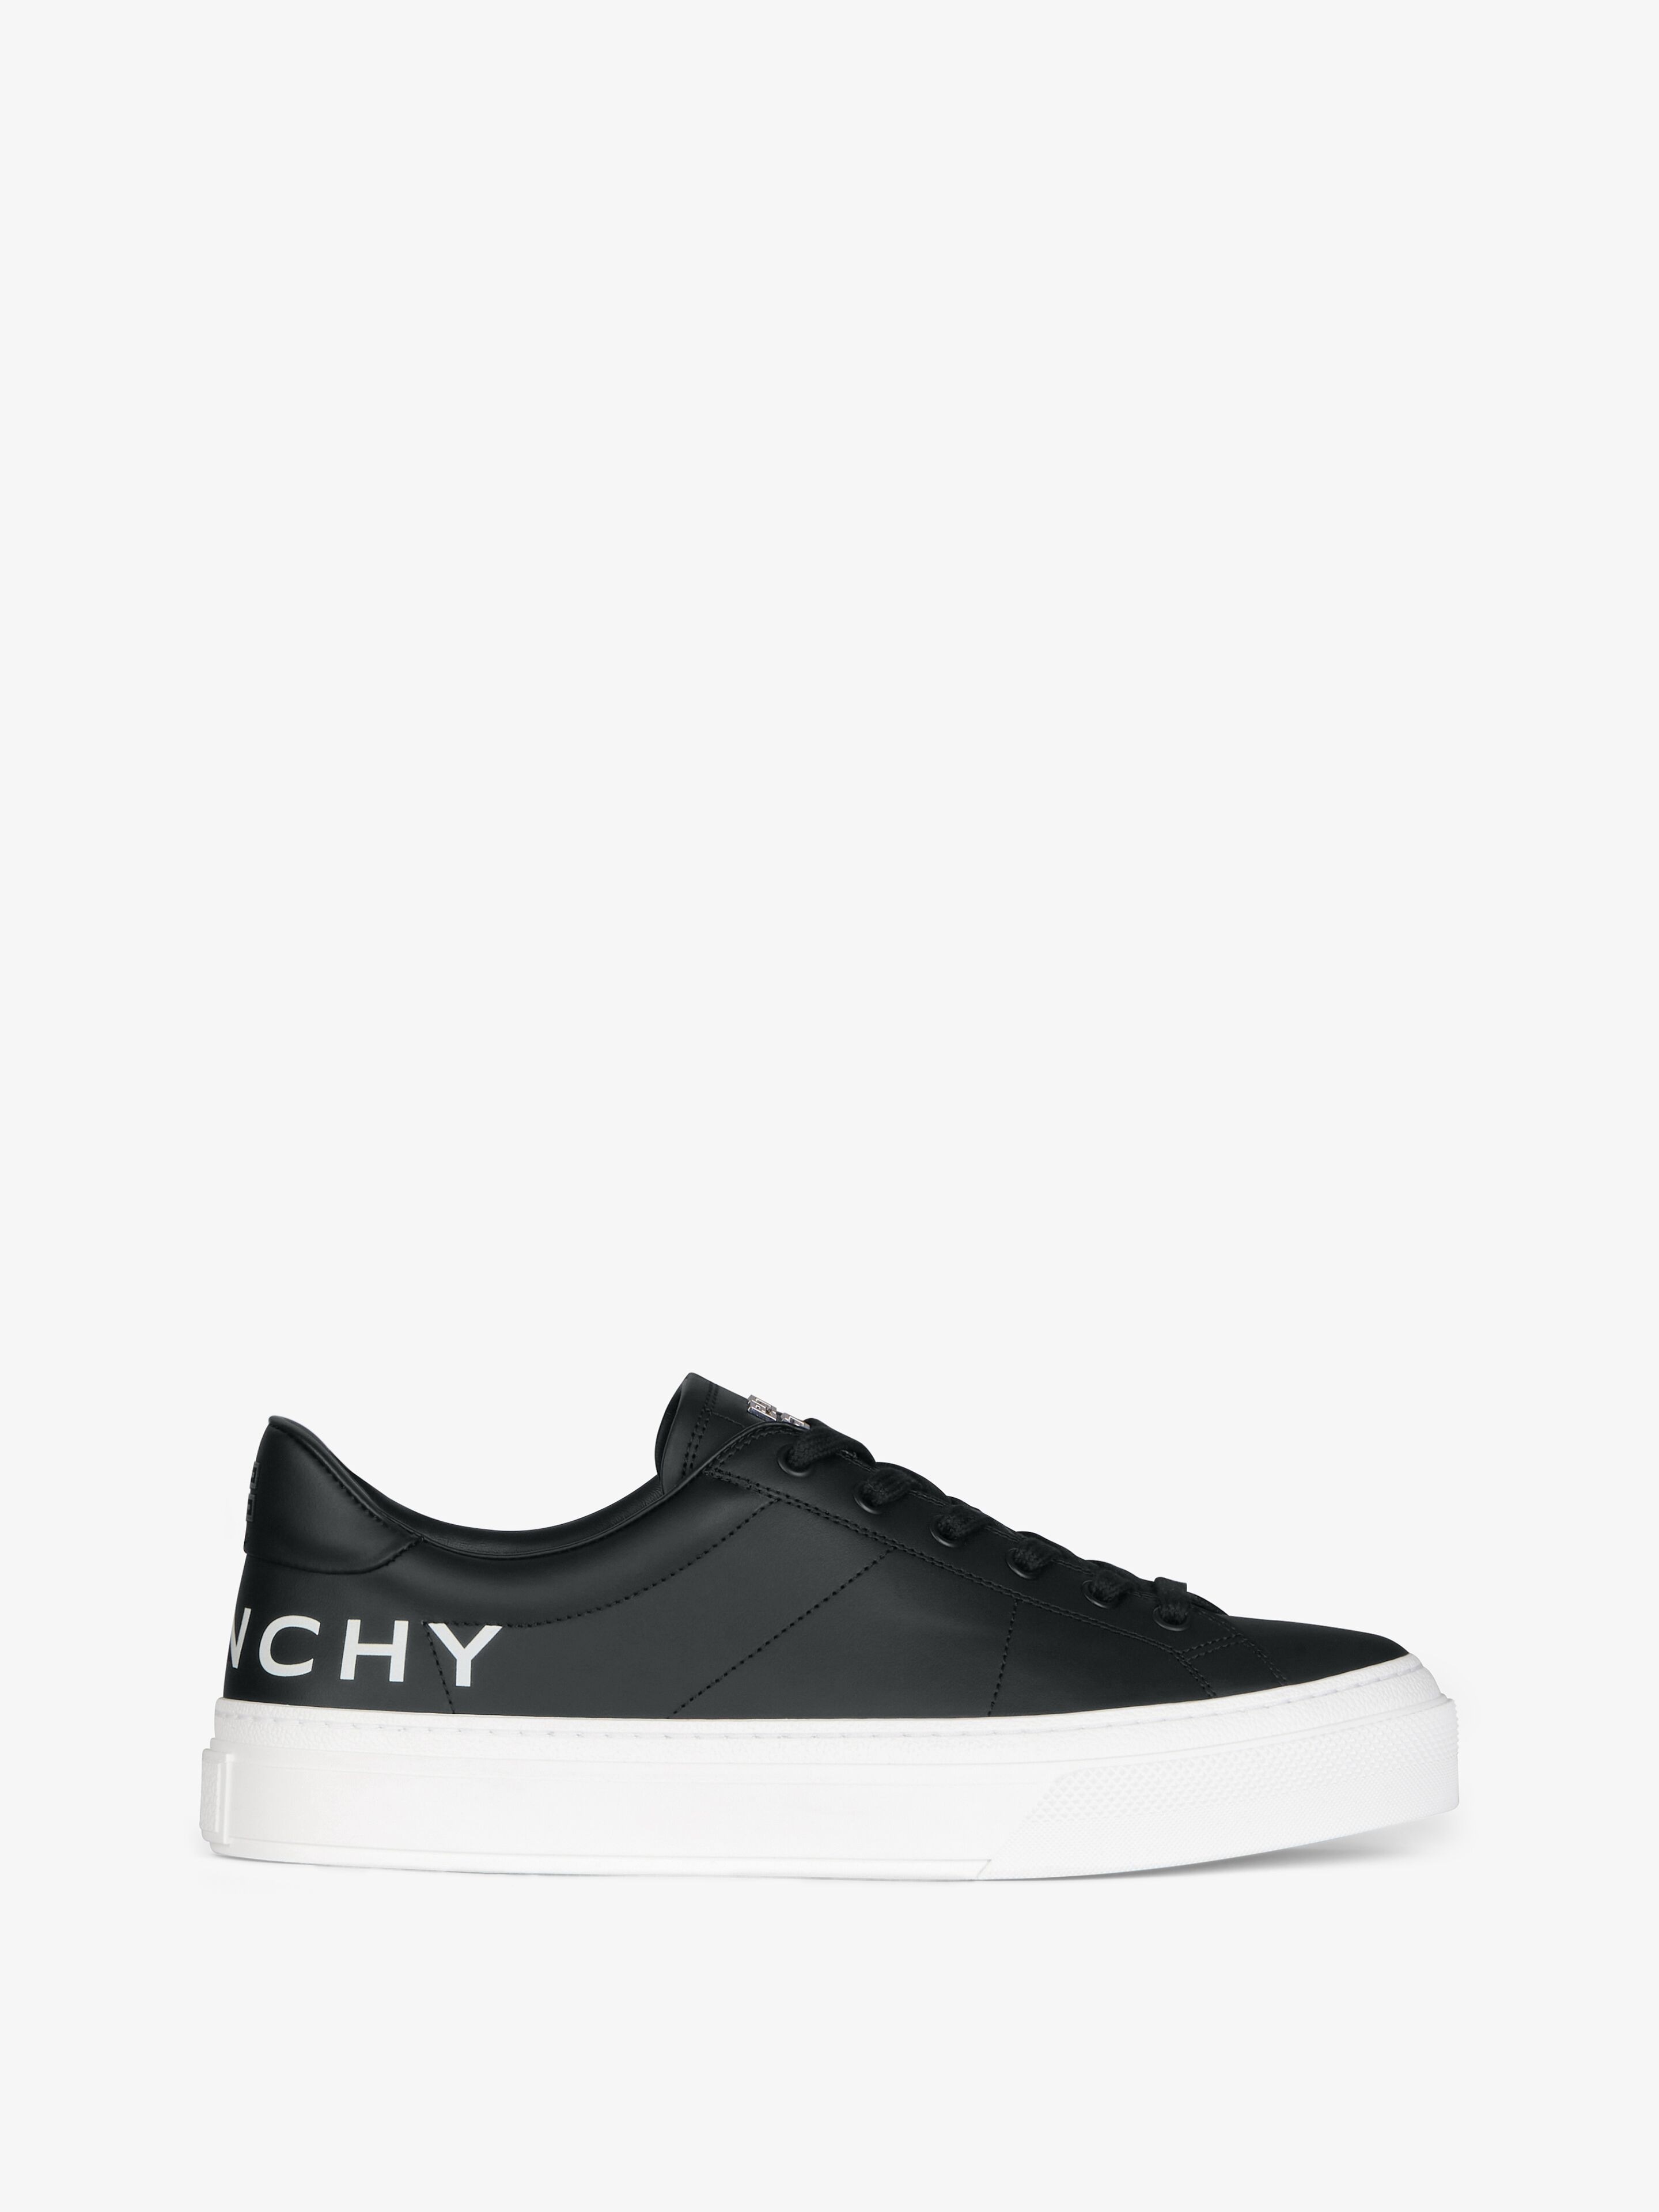 CITY SPORT SNEAKERS IN LEATHER WITH PRINTED GIVENCHY LOGO - 1